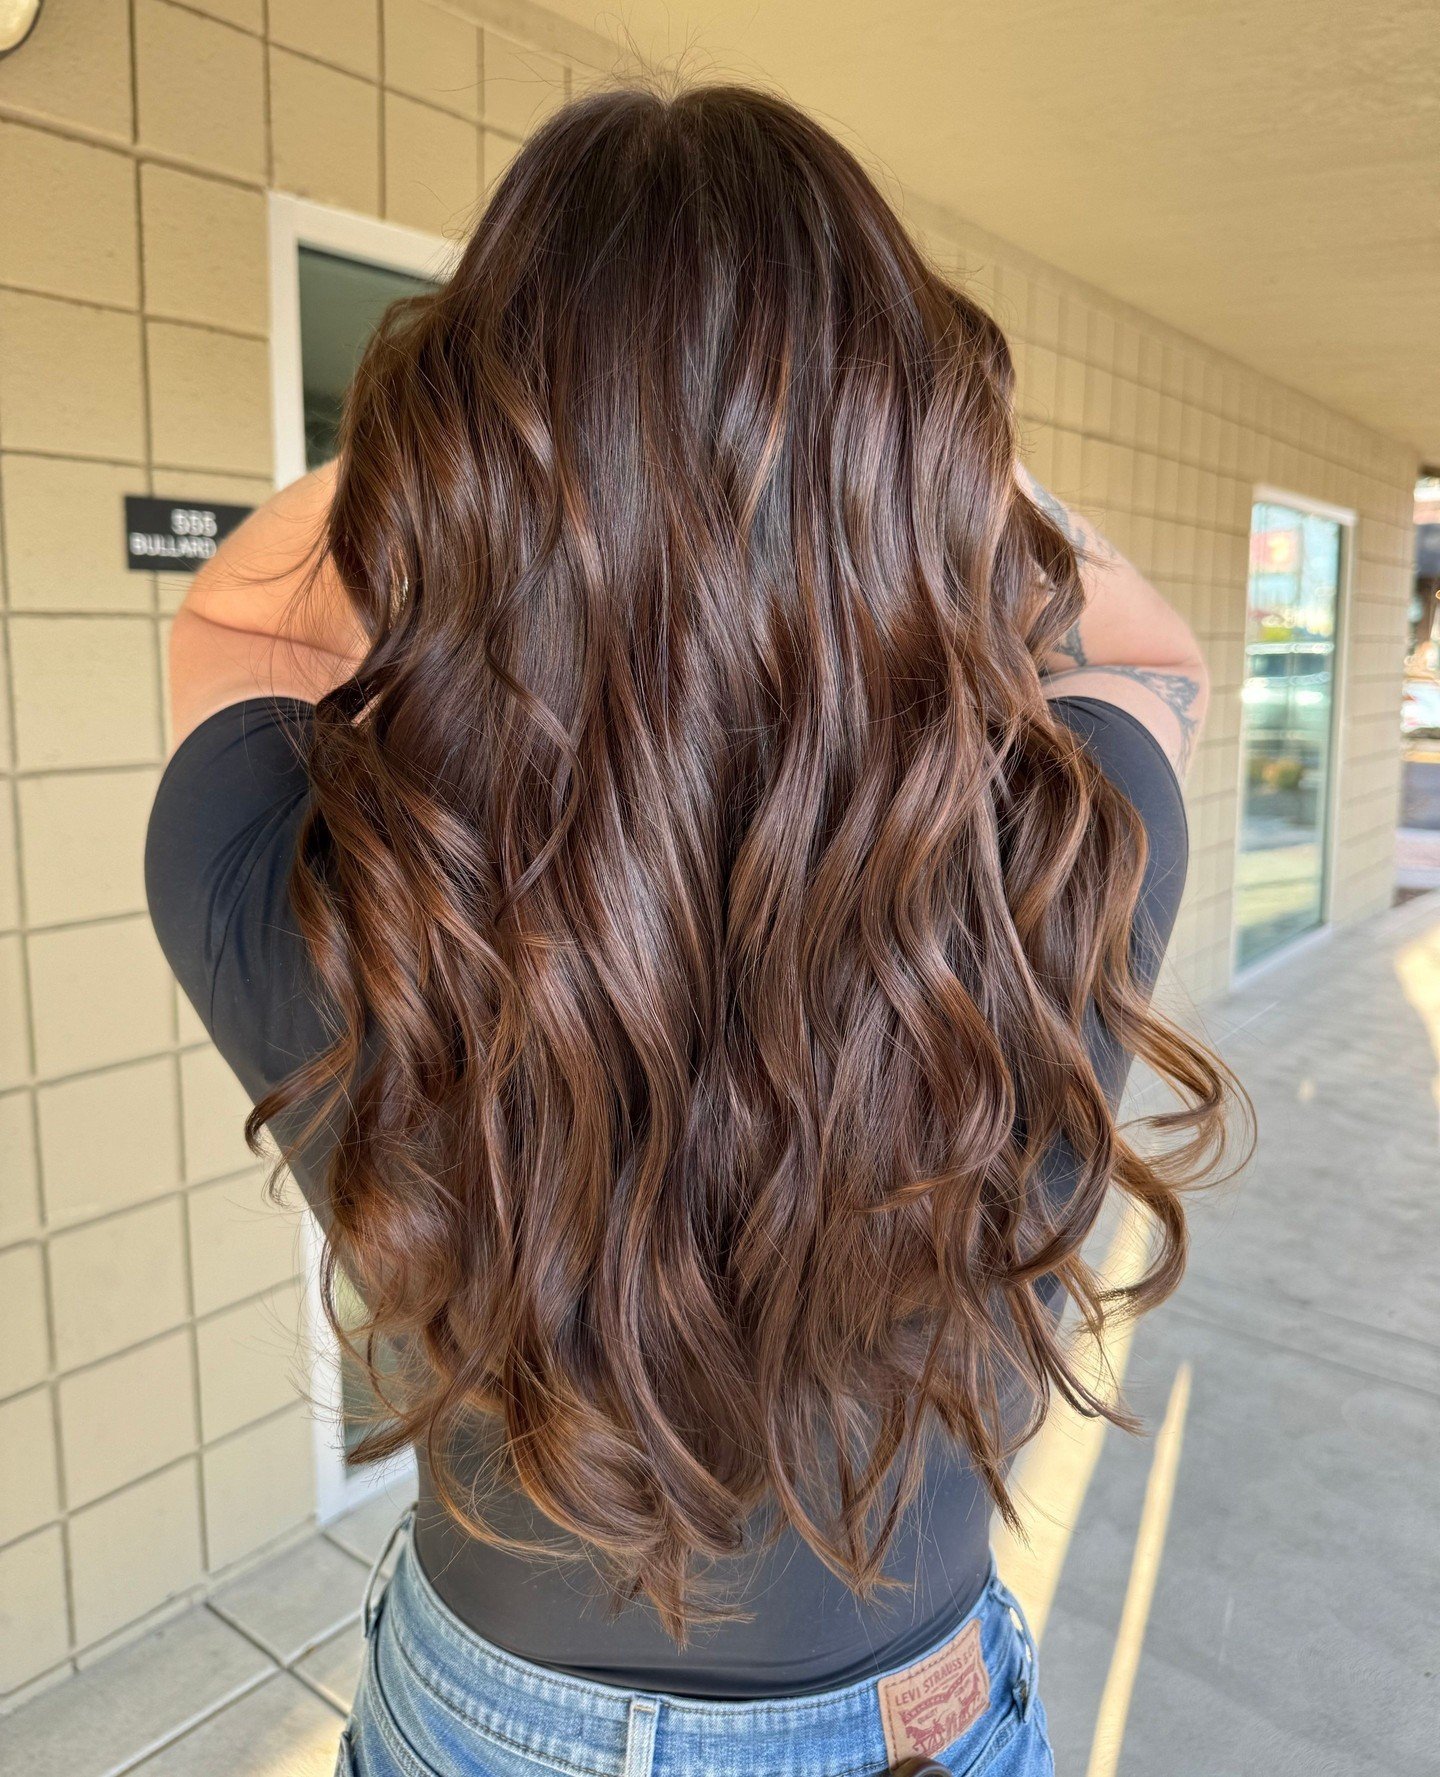 ✨ Stylist Spotlight: Brittany ✨⁠ @brittjo.stylist⁠
⁠
Check out her amazing work as she flawlessly toned it from brassy blonde to brunette. Be ready to be wowed by her expertise and attention to detail! 🌟⁠
⁠
Swipe to see the mesmerizing before and af